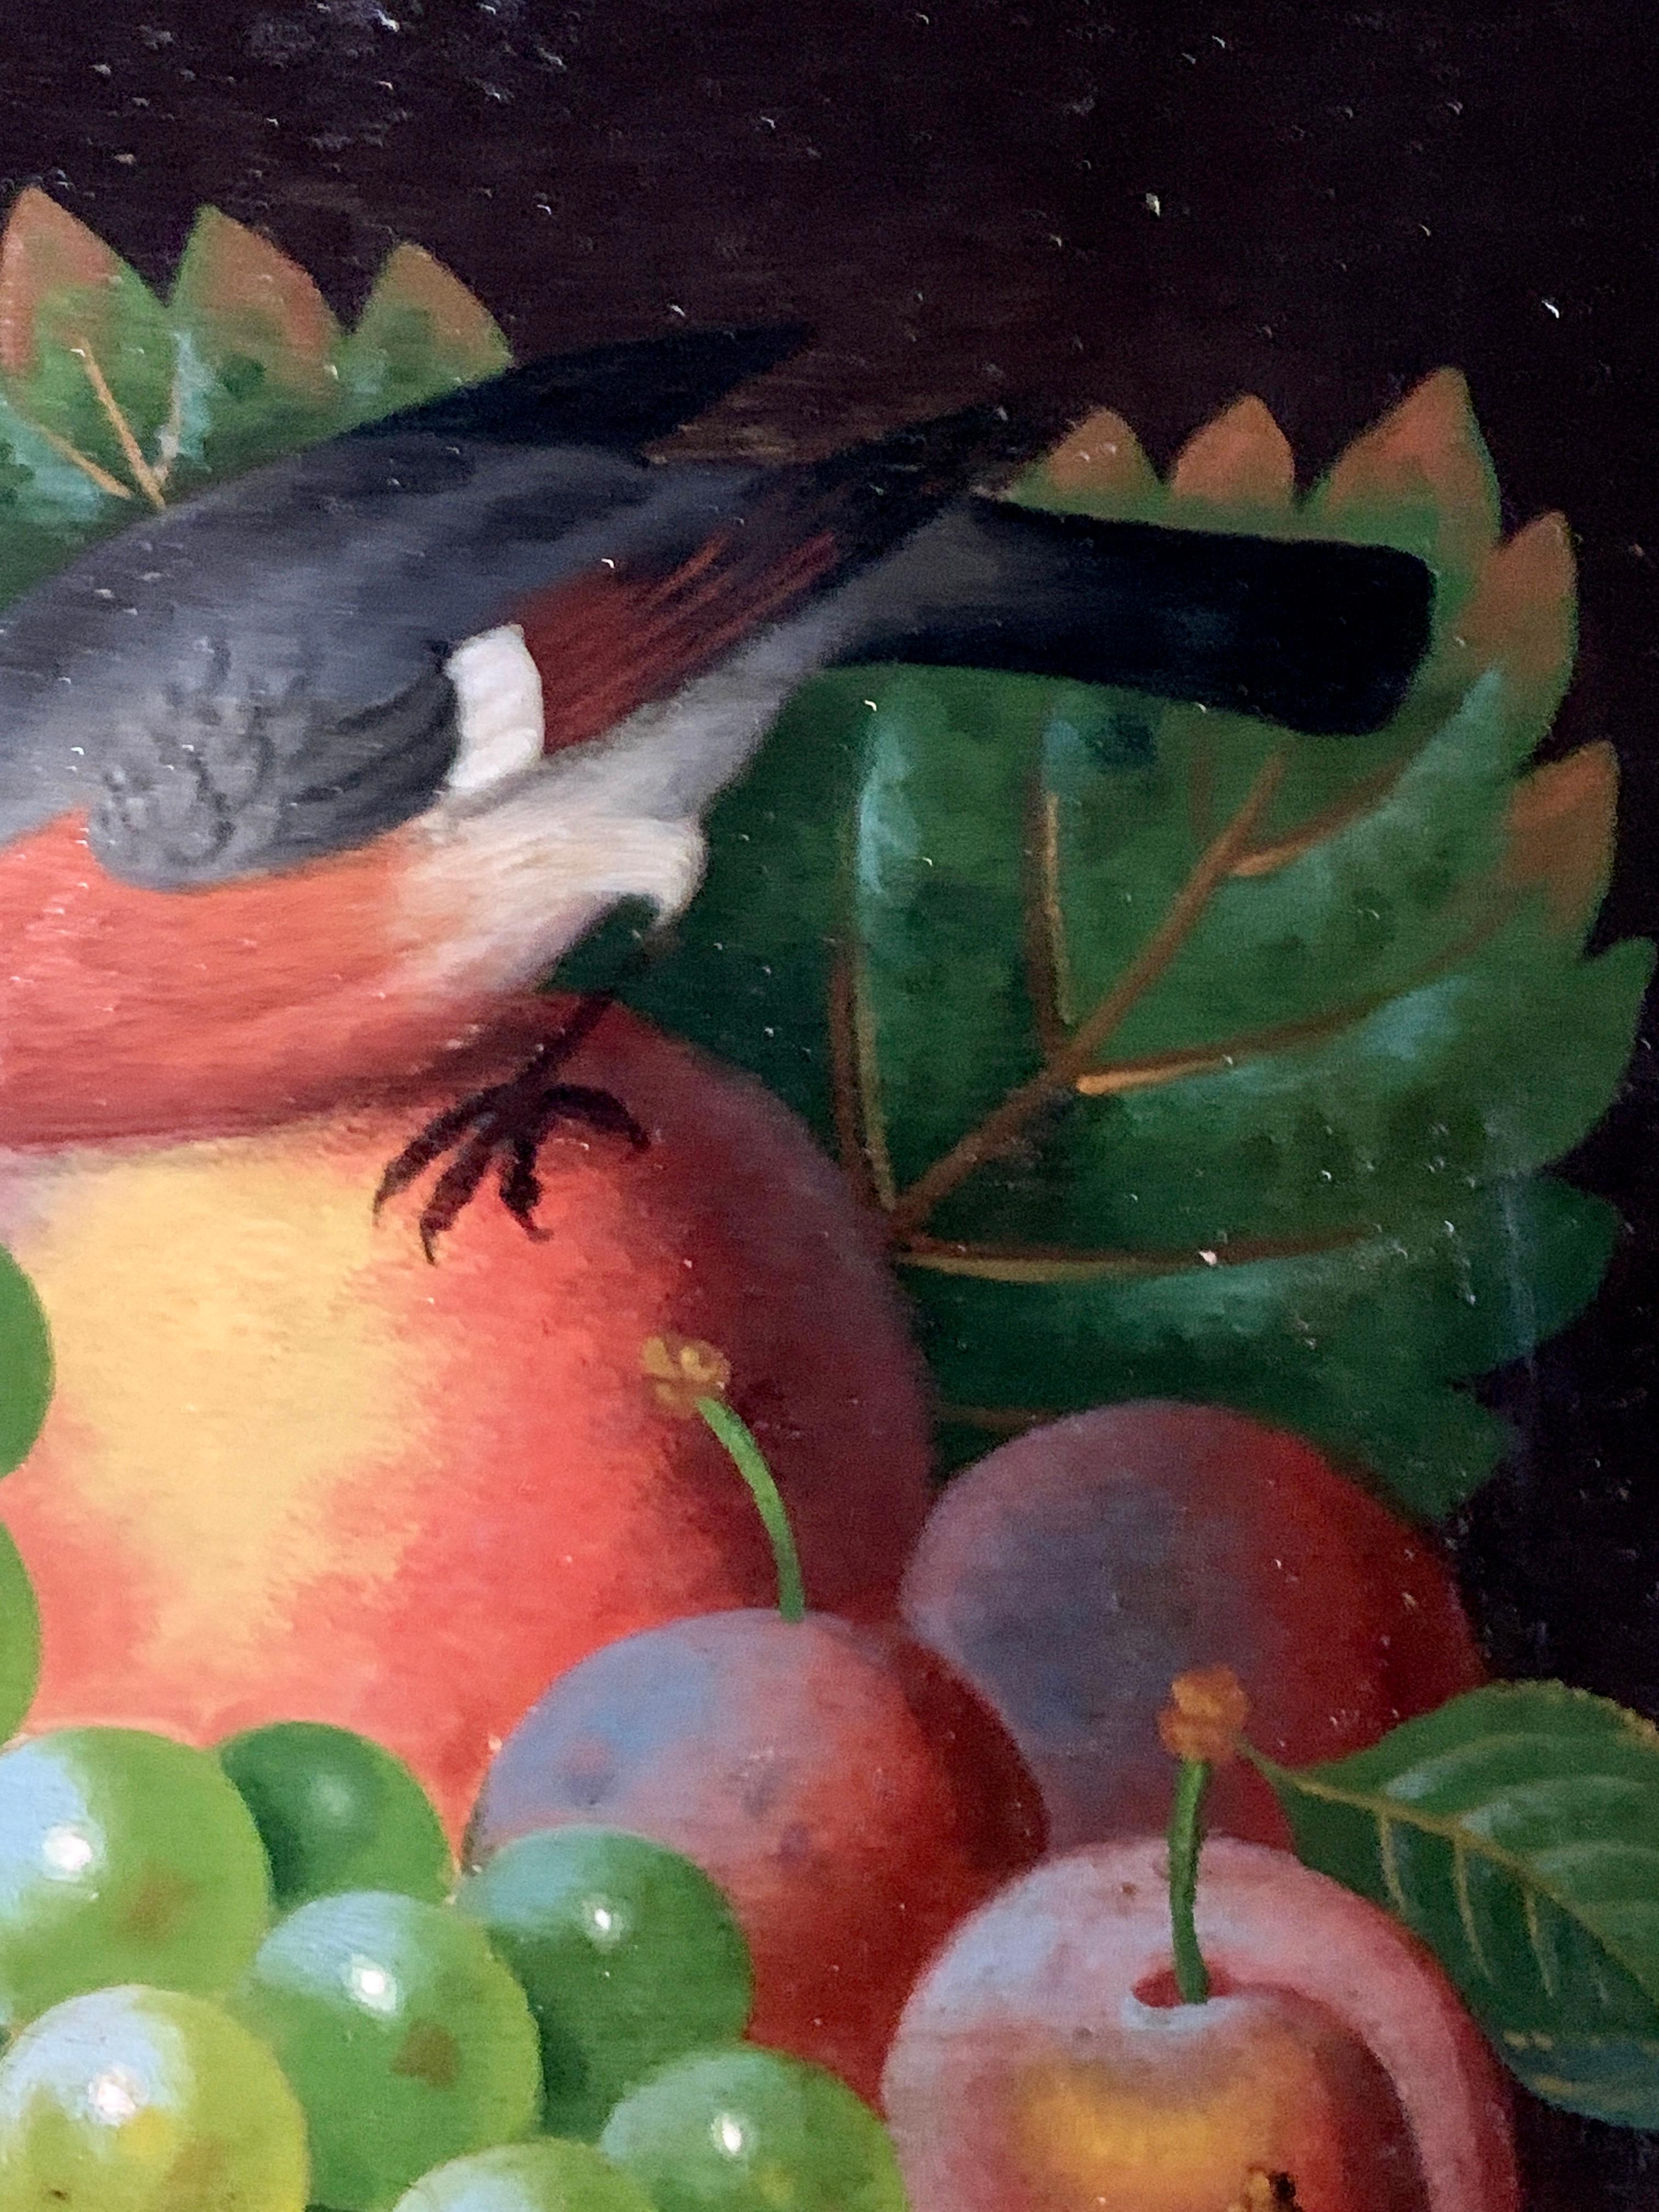 Early 19th century English still life of fruit and a chaffinch bird on a table. 1